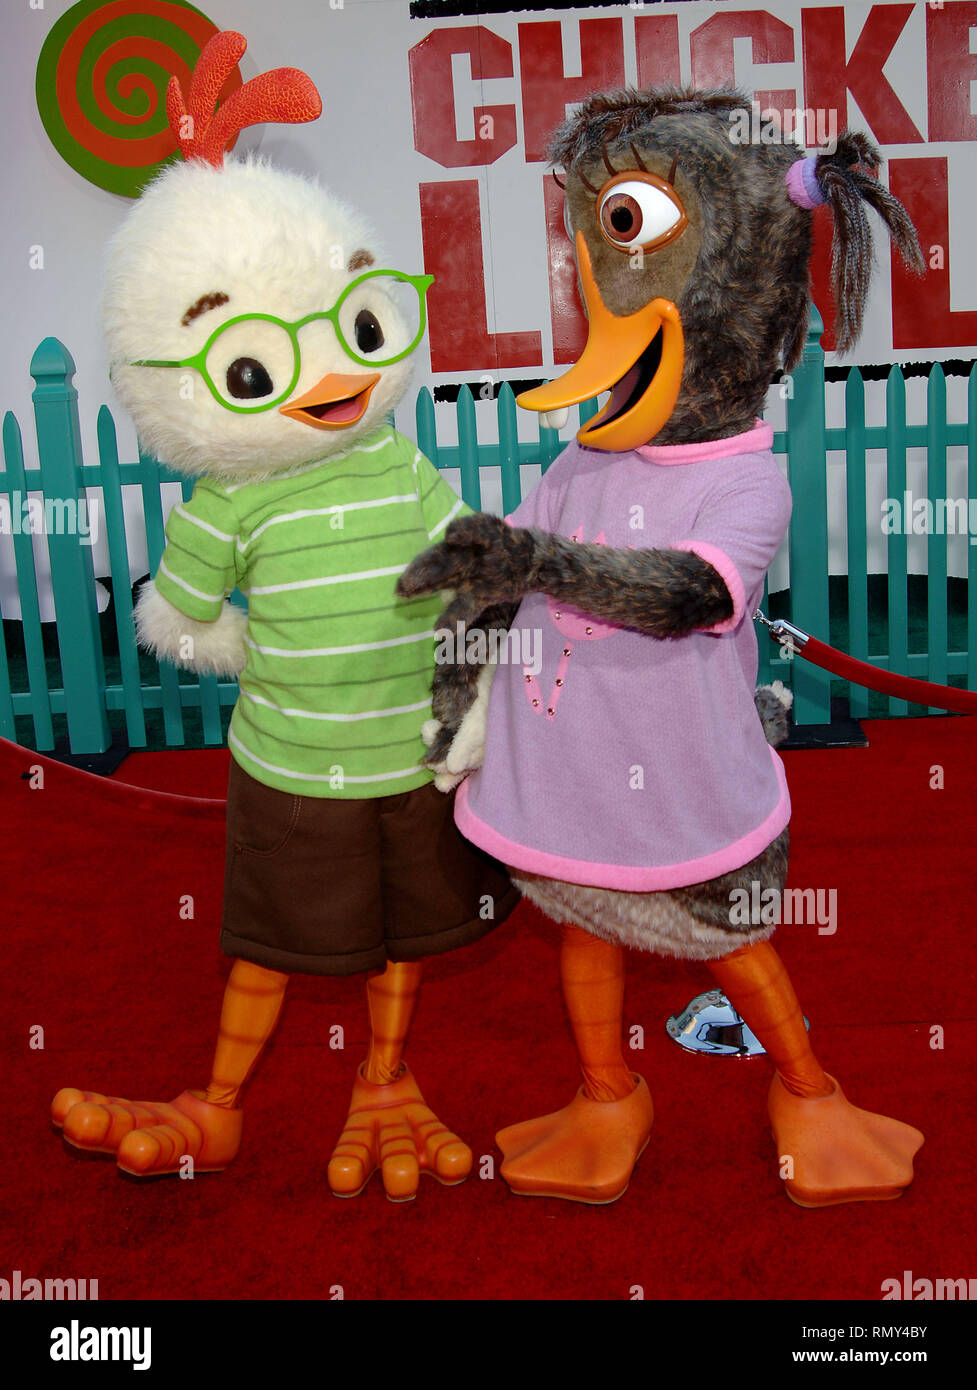 the CHICKEN LITTLE Premiere at the El Capitan Theatre in Los Angeles. October 30, 2005.ChickenLittle042.jpgChickenLittle042  Event in Hollywood Life - California, Red Carpet Event, Vertical, USA, Film Industry, Celebrities, Photography, Bestof, Arts Culture and Entertainment, Topix Celebrities fashion, Best of, Hollywood Life, Event in Hollywood Life - California, Red Carpet and backstage, movie celebrities, TV celebrities, Music celebrities, Topix, from the year 2000-2009 inquiry tsuni@Gamma-USA.com , Credit Tsuni / USA,  Object wear on the red carpet, one person,   Event in Hollywood Life -  Stock Photo